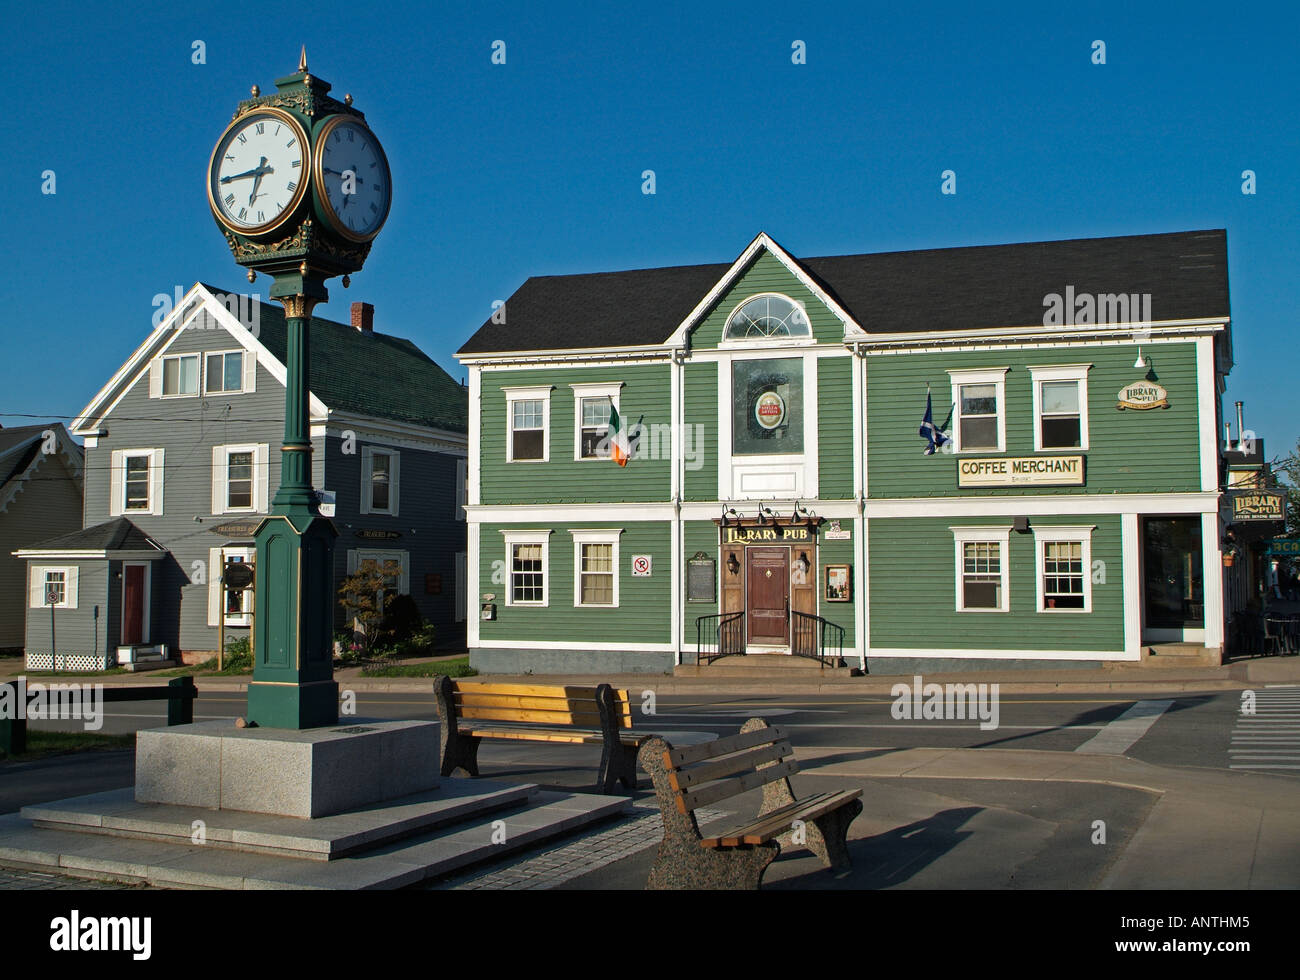 The four sided clock, down town, Wolfville, Nova Scotia, Canada. Green buildings in the background. Stock Photo